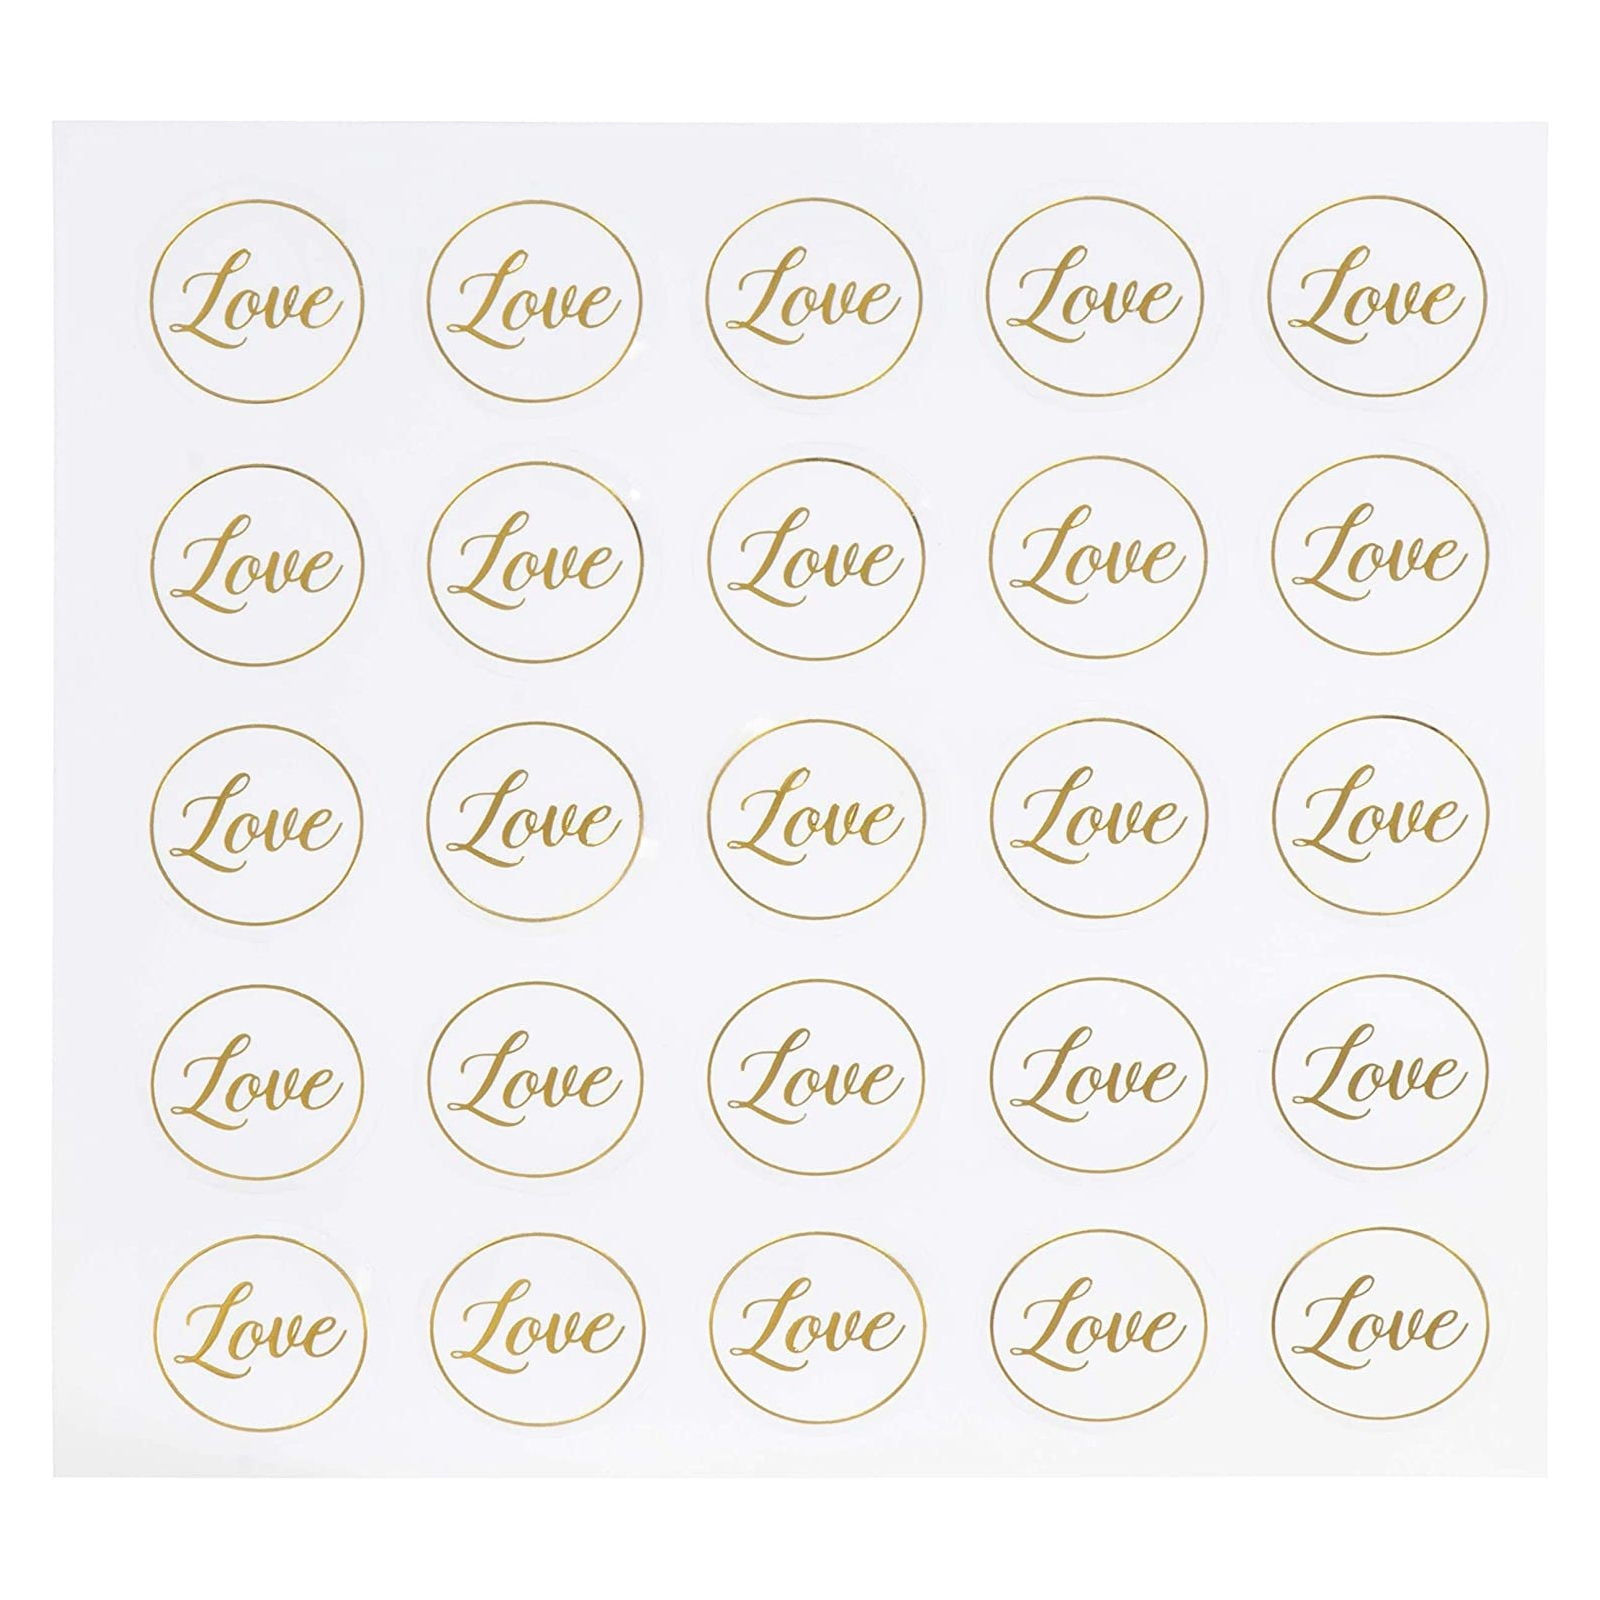 Paper Junkie Clear Stickers - 200-Count Wedding Stickers, Gold Envelope Seal Stickers with Love, Adhesive Label for Bridal Shower Invitation, Wedding